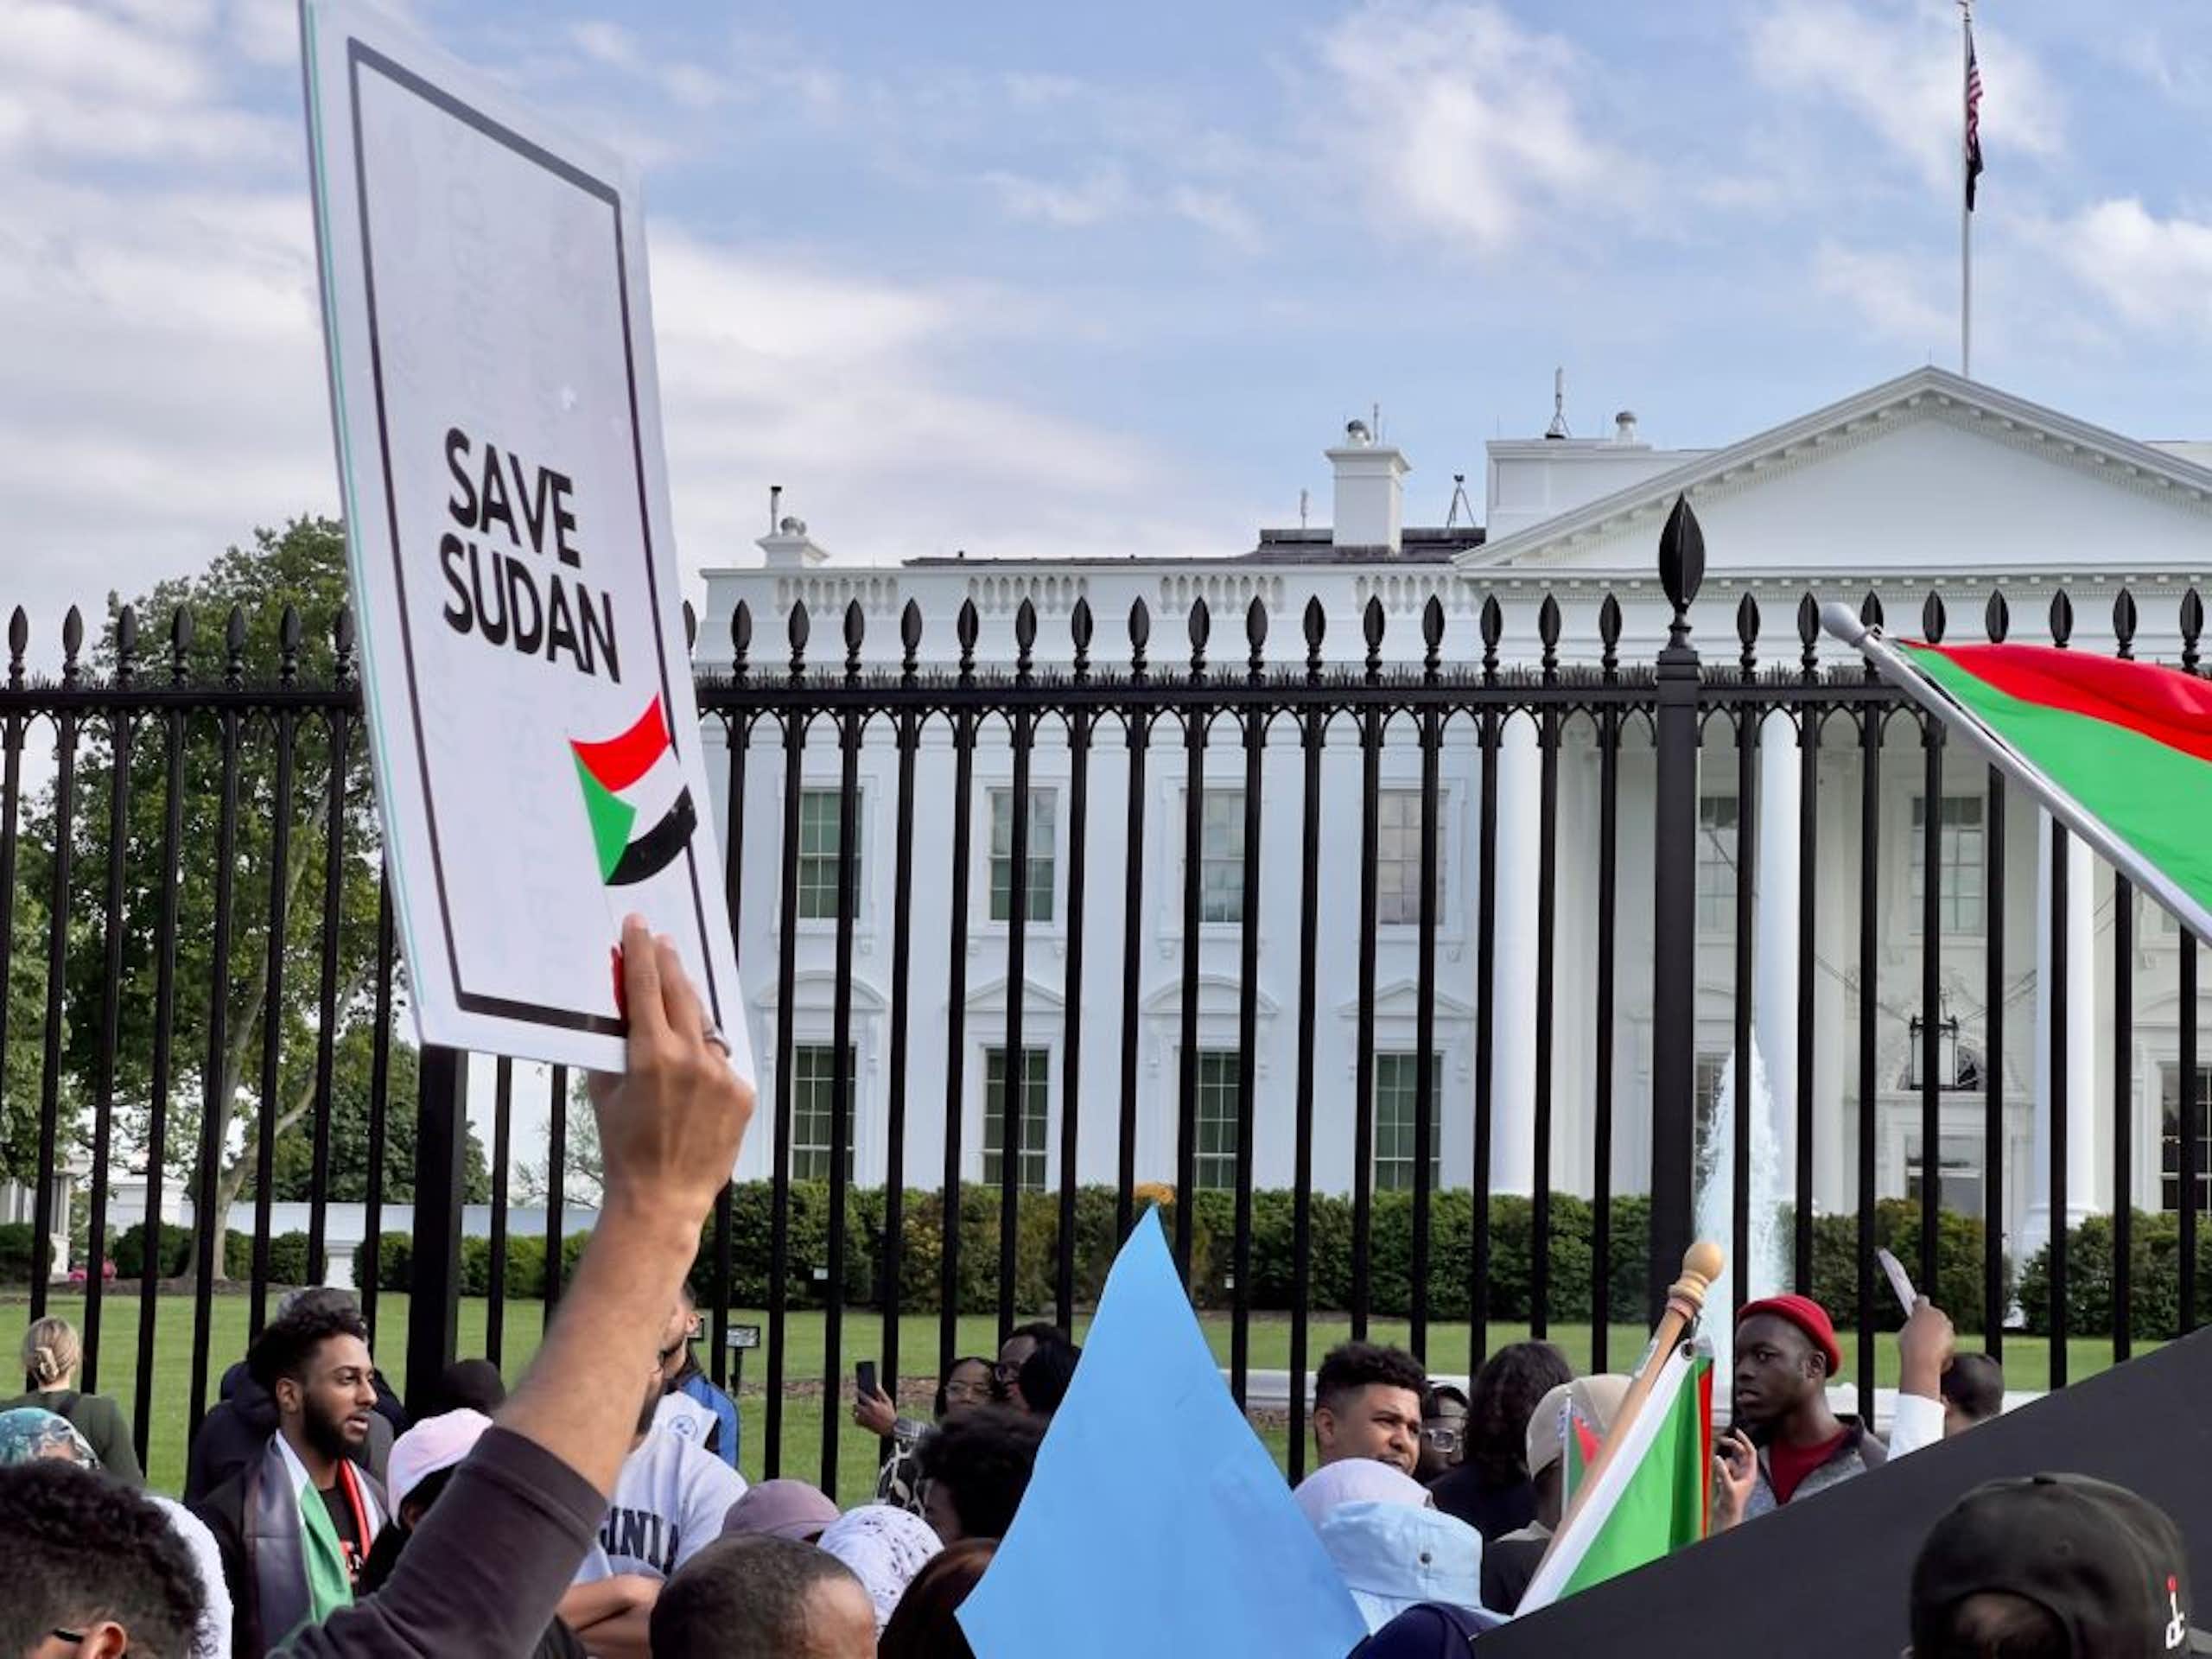 A crowd of people holding flags stand in front of a large white building, with one placard held up that says 'save Sudan'